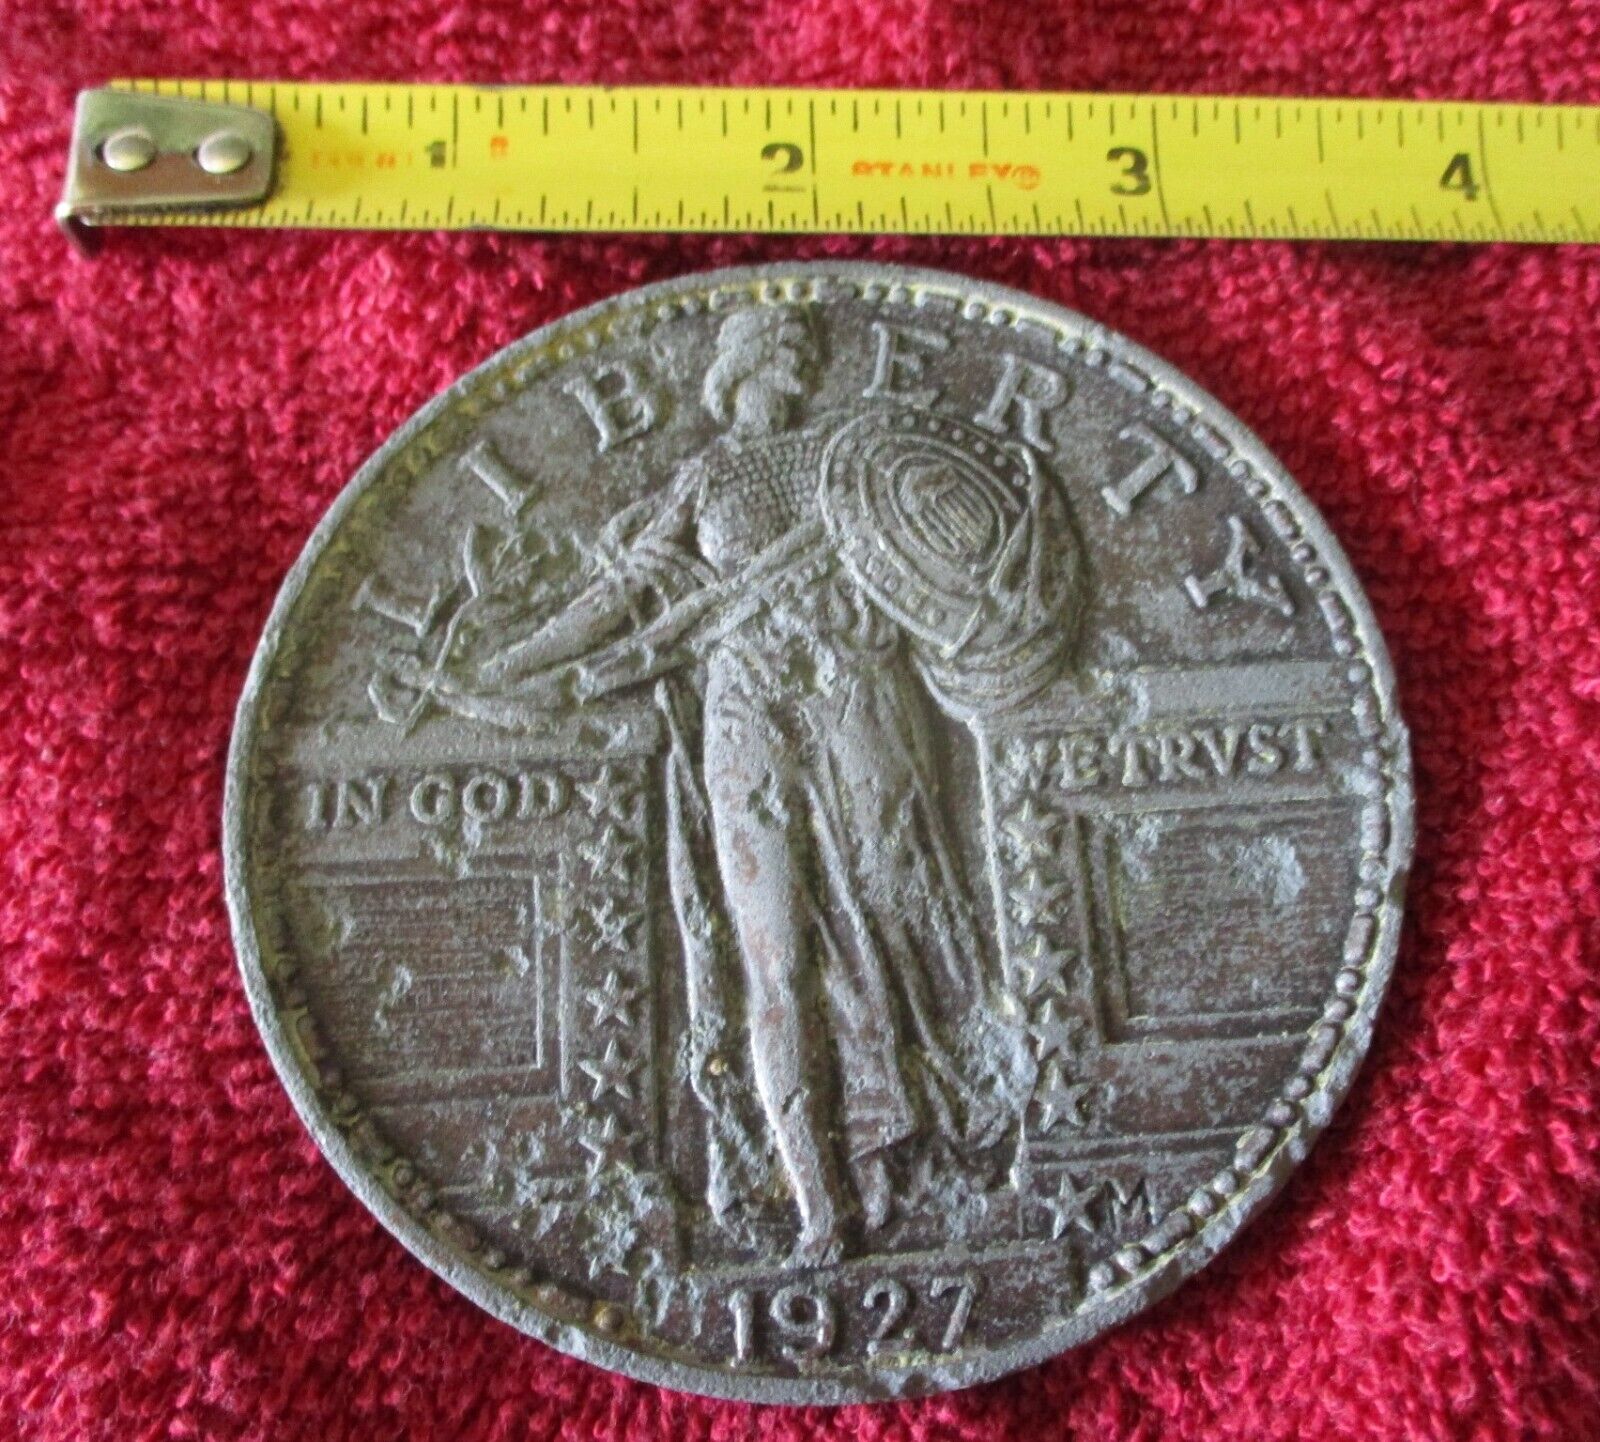 1927 Standing Liberty Quarter Replica 3 Inches. 2.0 Ounces. Zinc or Other Metal